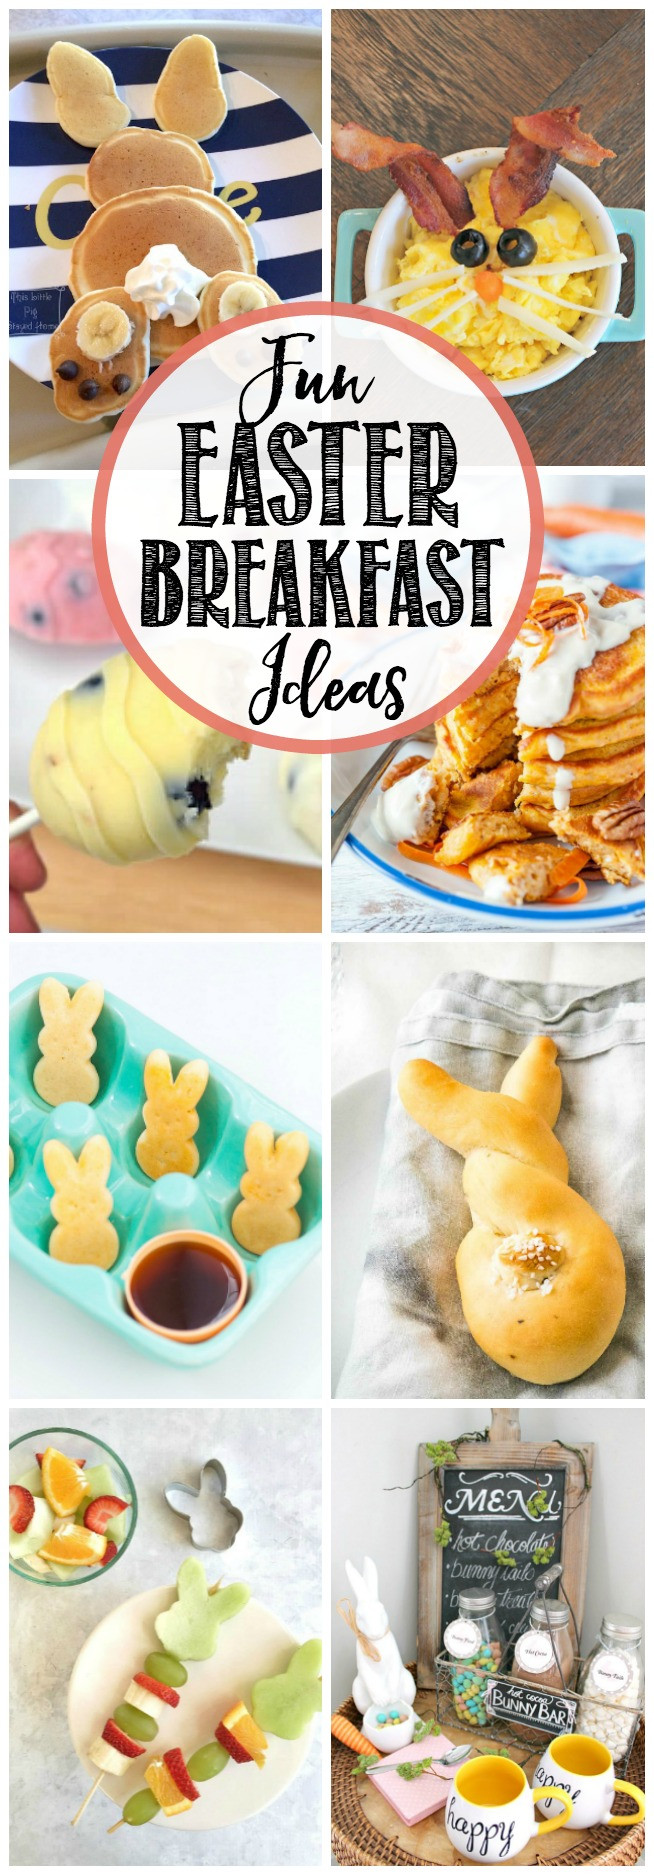 Easter Breakfast For Kids
 Easter Breakfast Ideas for Kids Clean and Scentsible